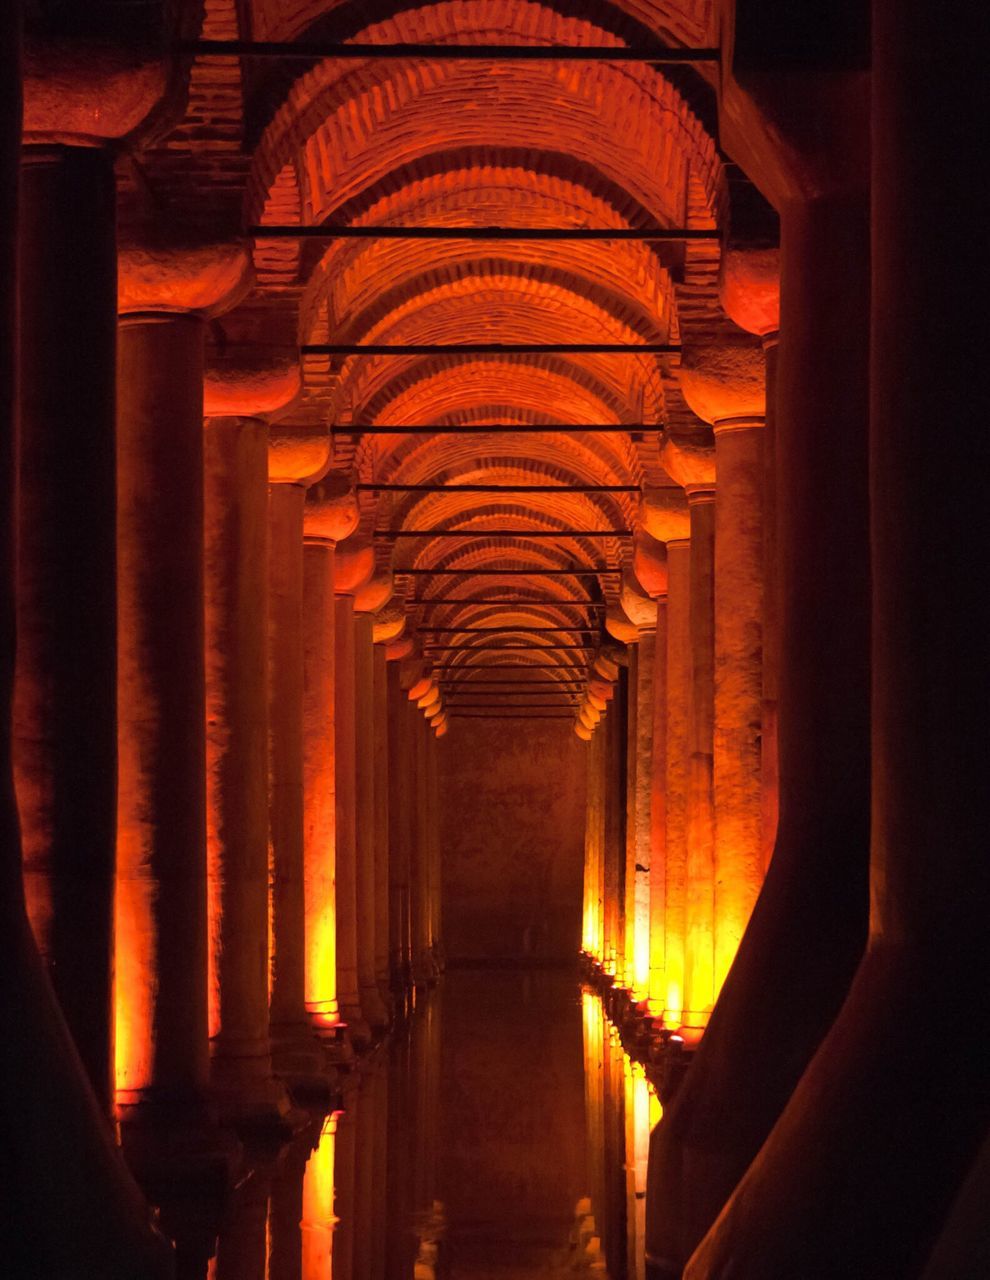 indoors, illuminated, in a row, auto post production filter, empty, diminishing perspective, architecture, ceiling, long, orange color, the way forward, corridor, arch, vanishing point, electric light, architectural column, lit, architectural feature, modern, no people